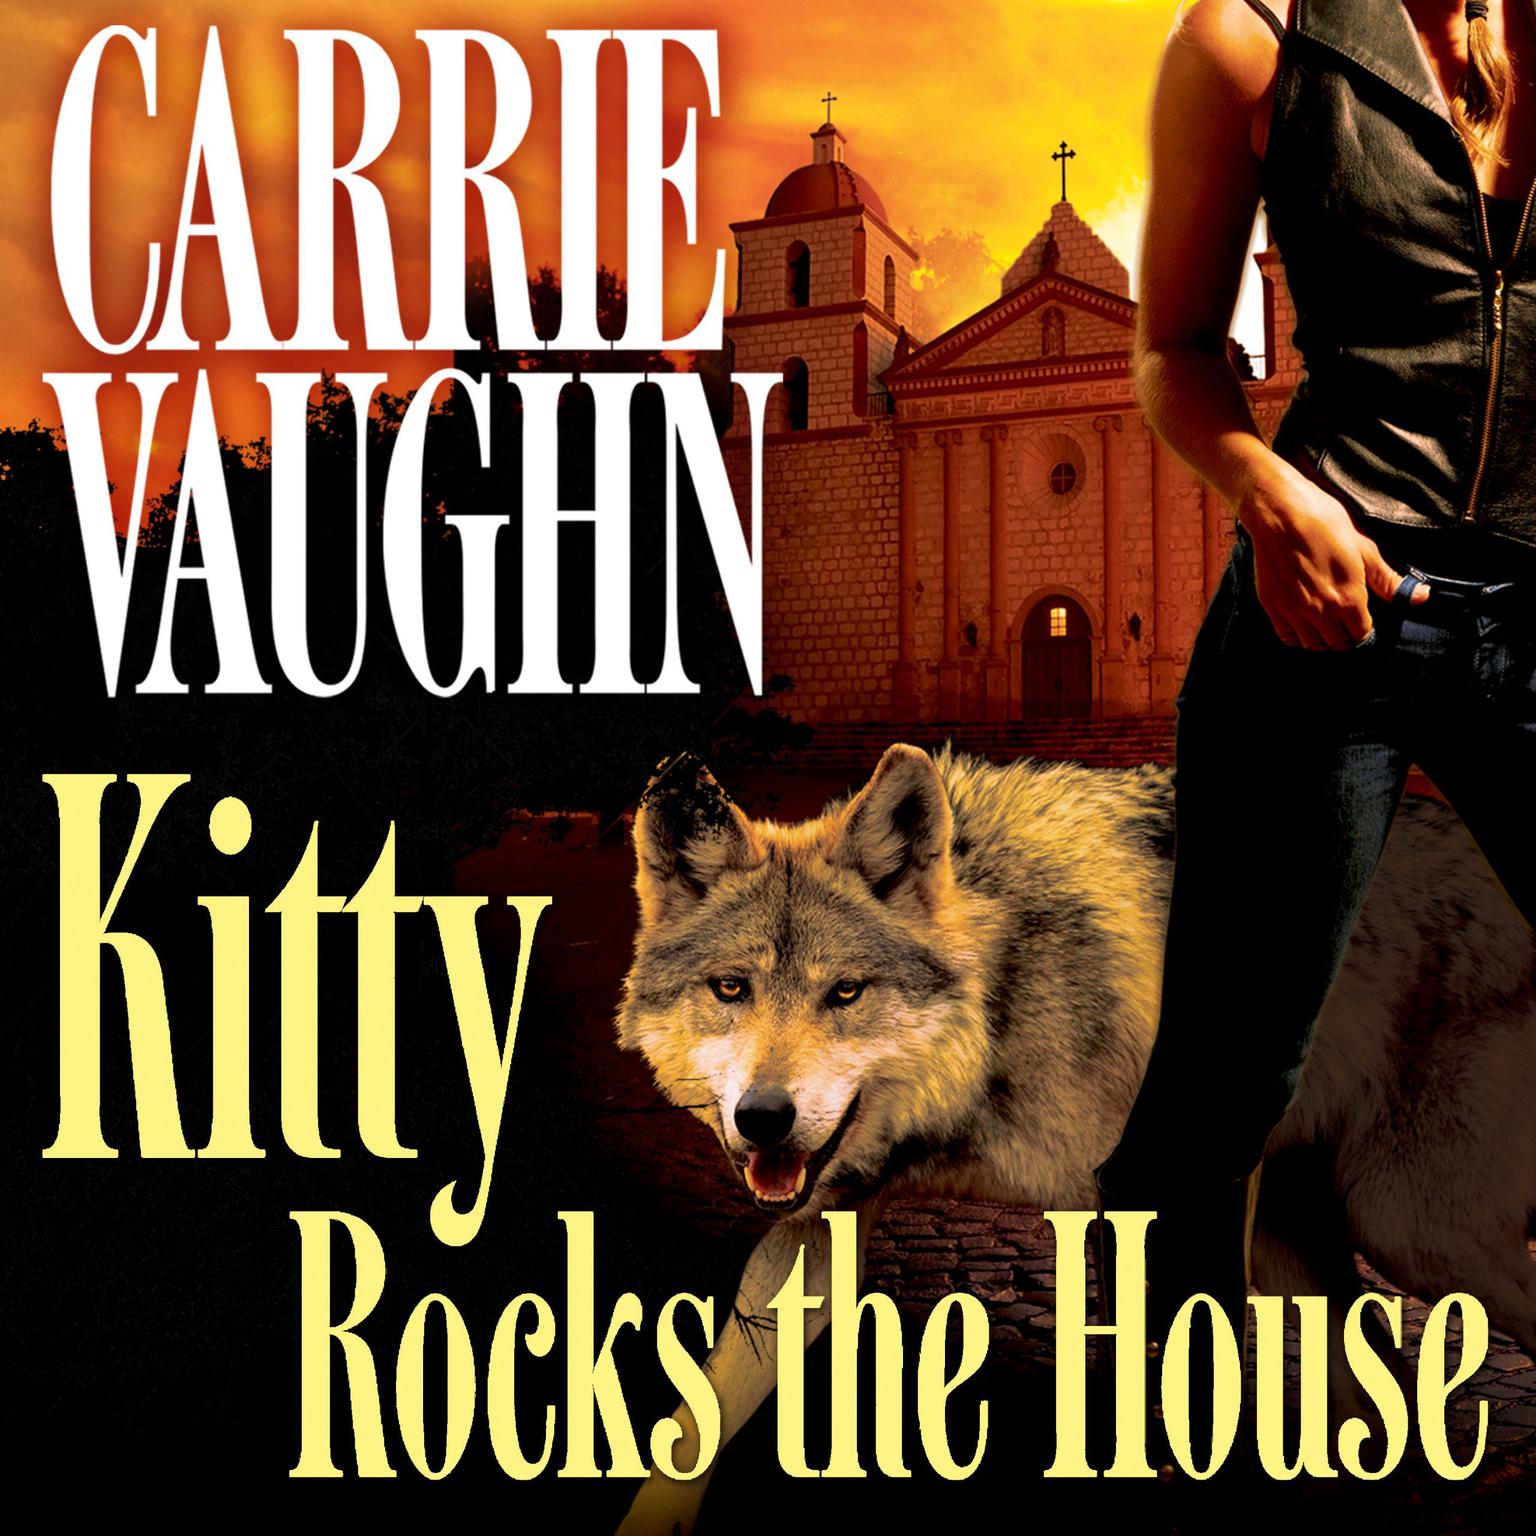 Kitty Rocks the House Audiobook, by Carrie Vaughn